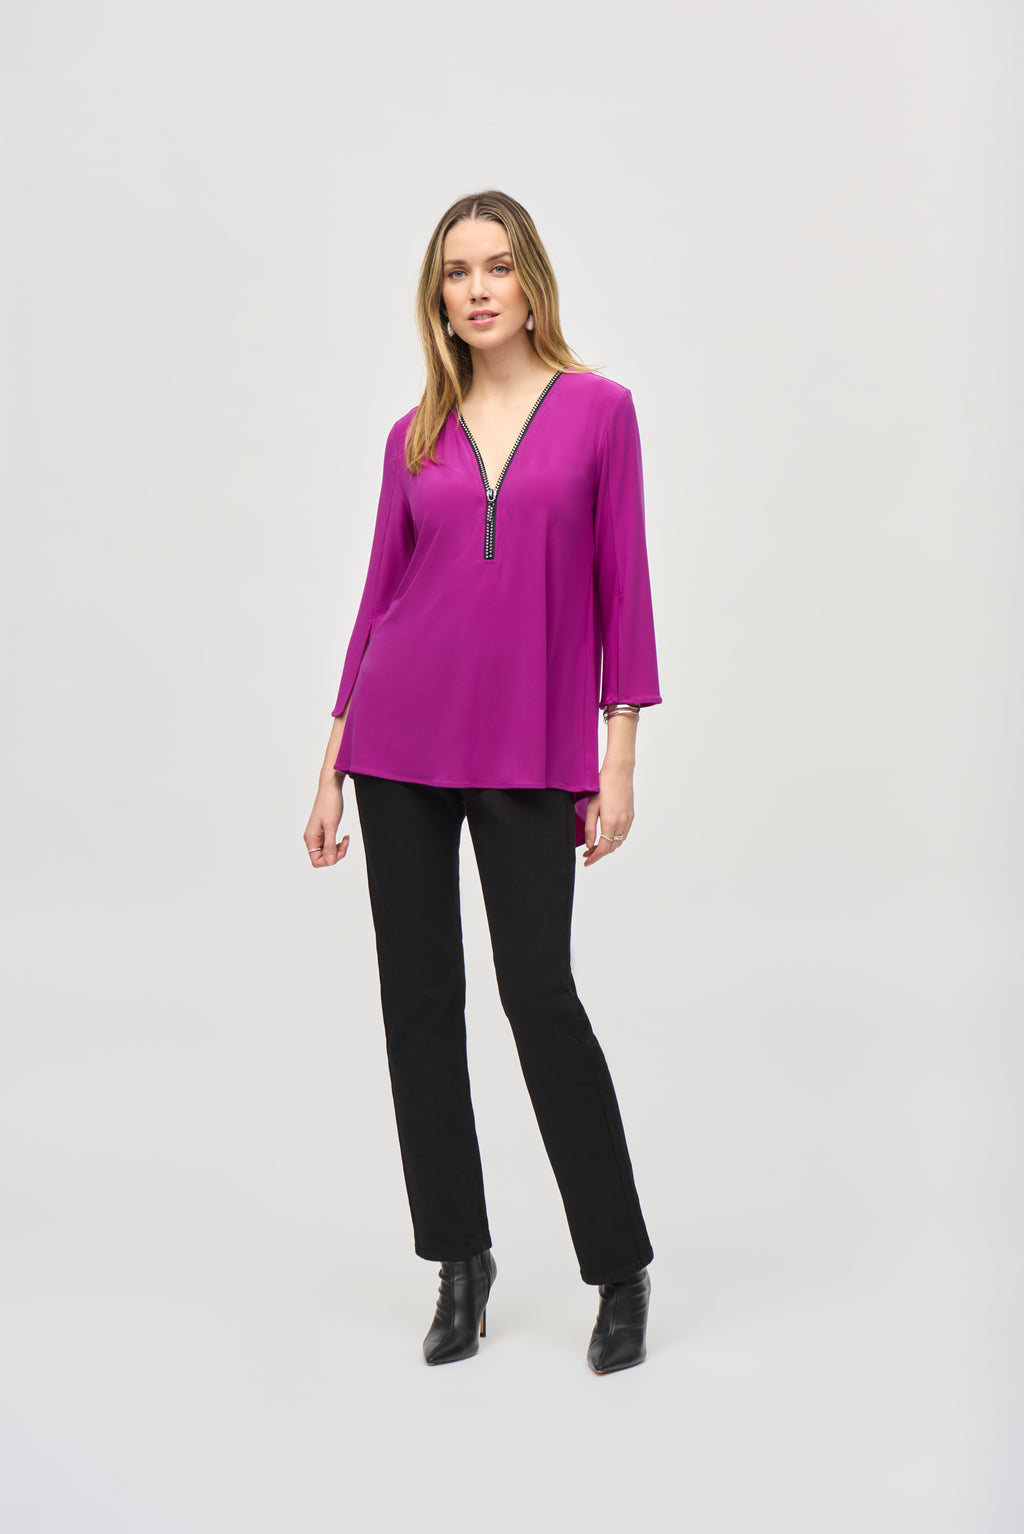 joseph ribkoff silky knit fit & flare tunic in magenta (front)